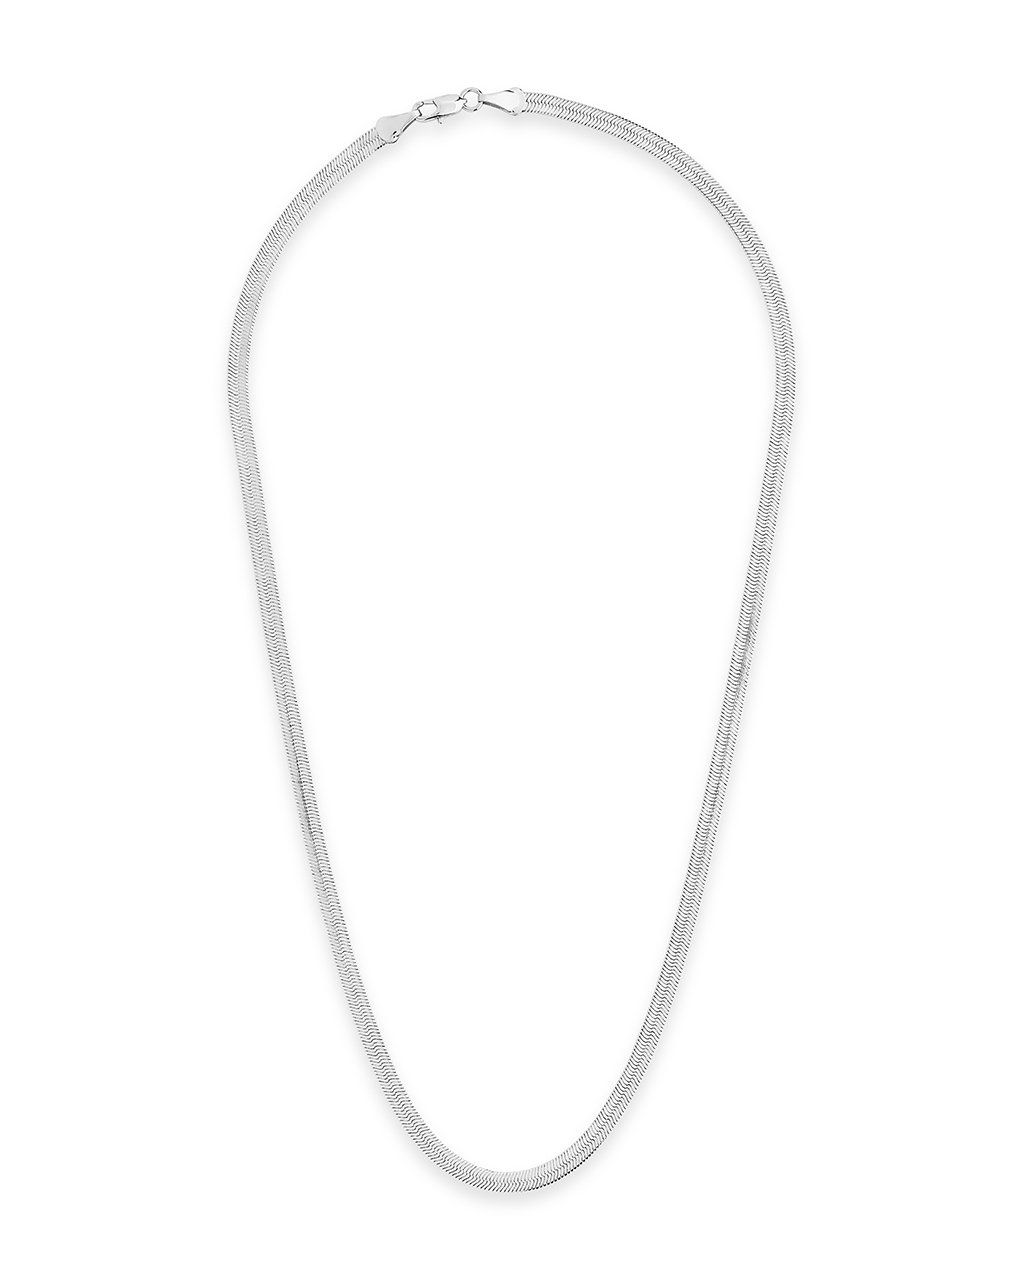 Herringbone Chain Necklace Sterling Forever 